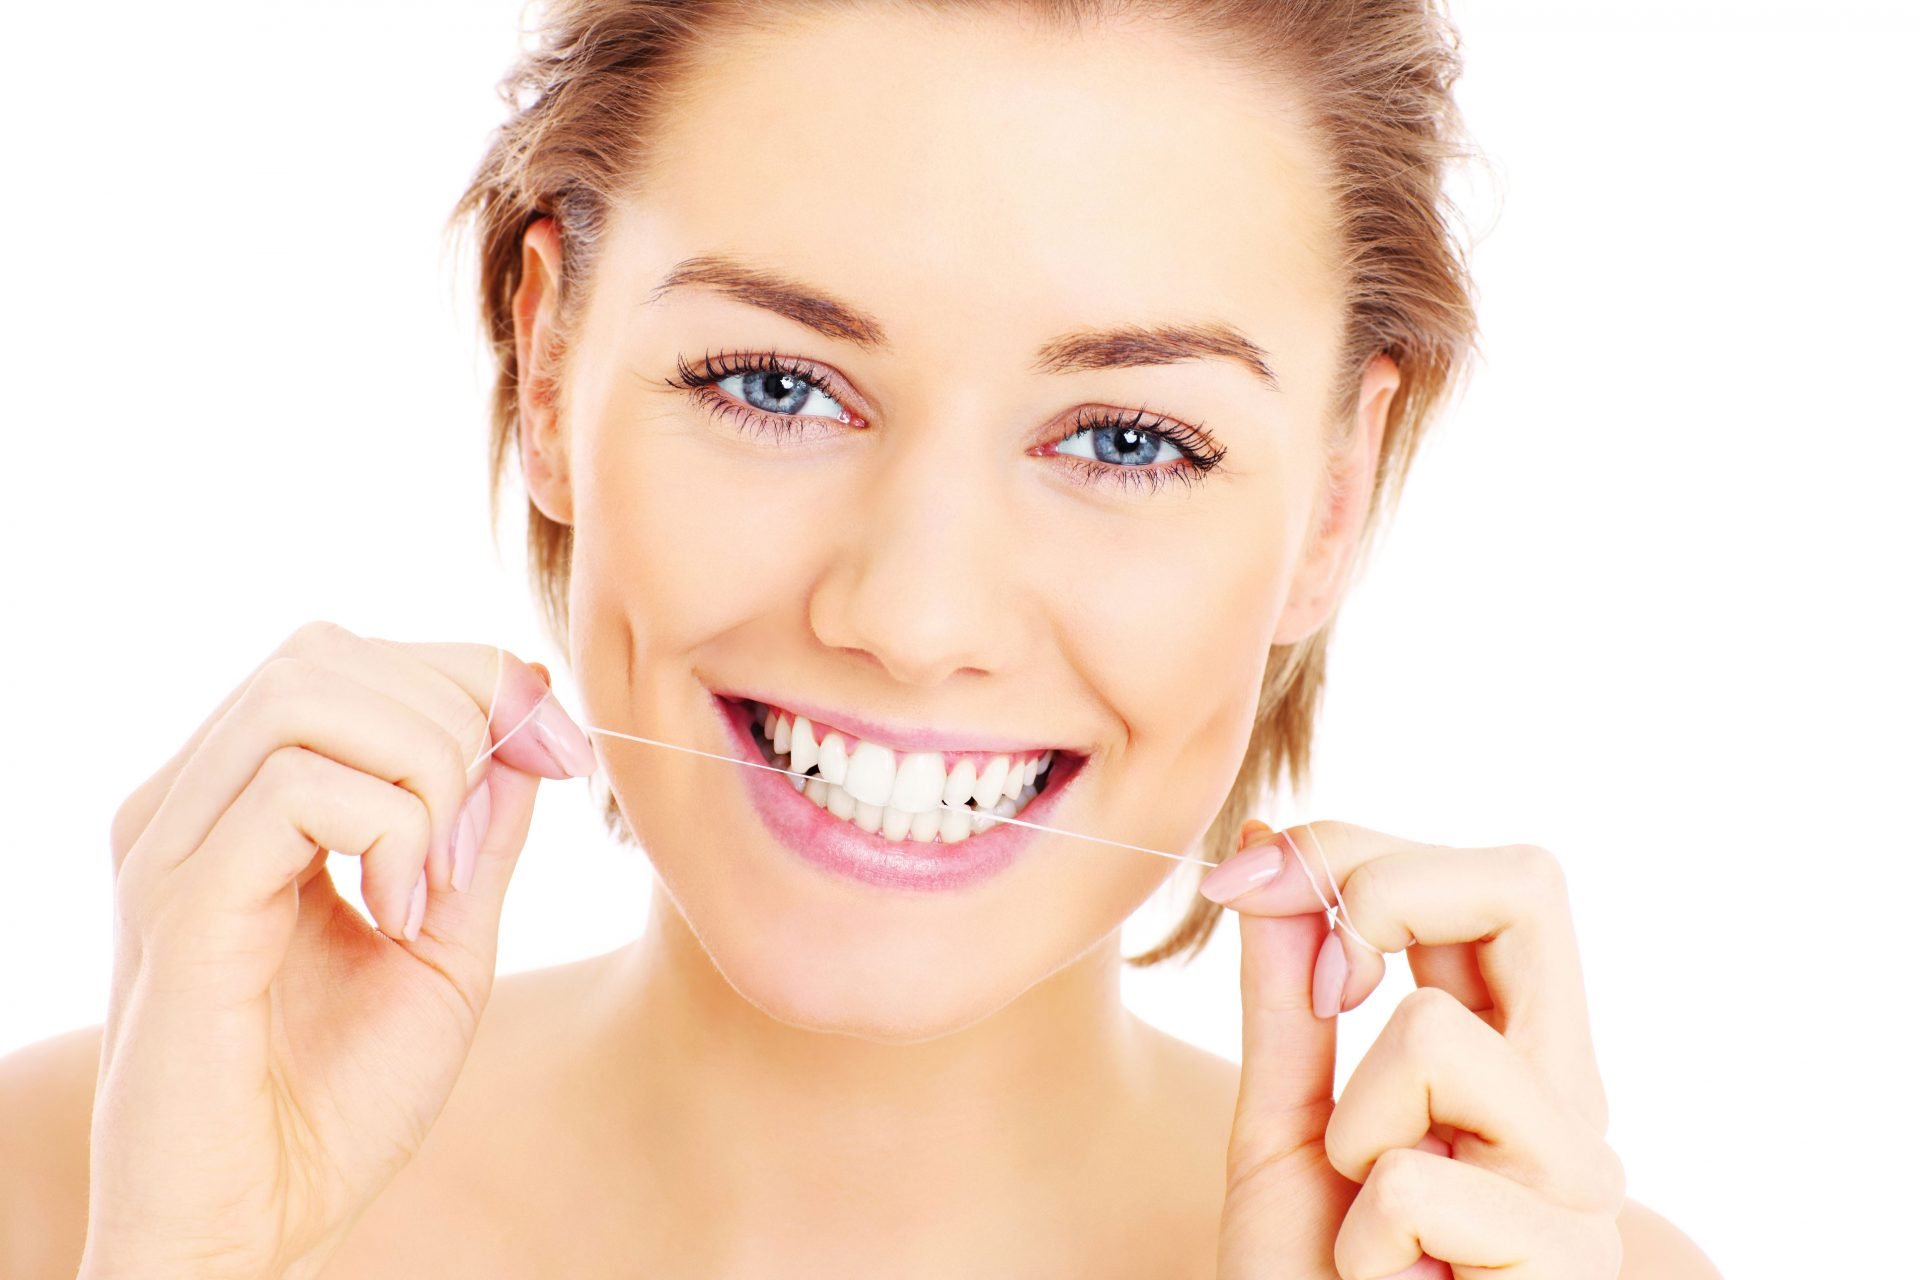 Only Floss The Teeth You Want To Keep | Dentist in Paradise Valley